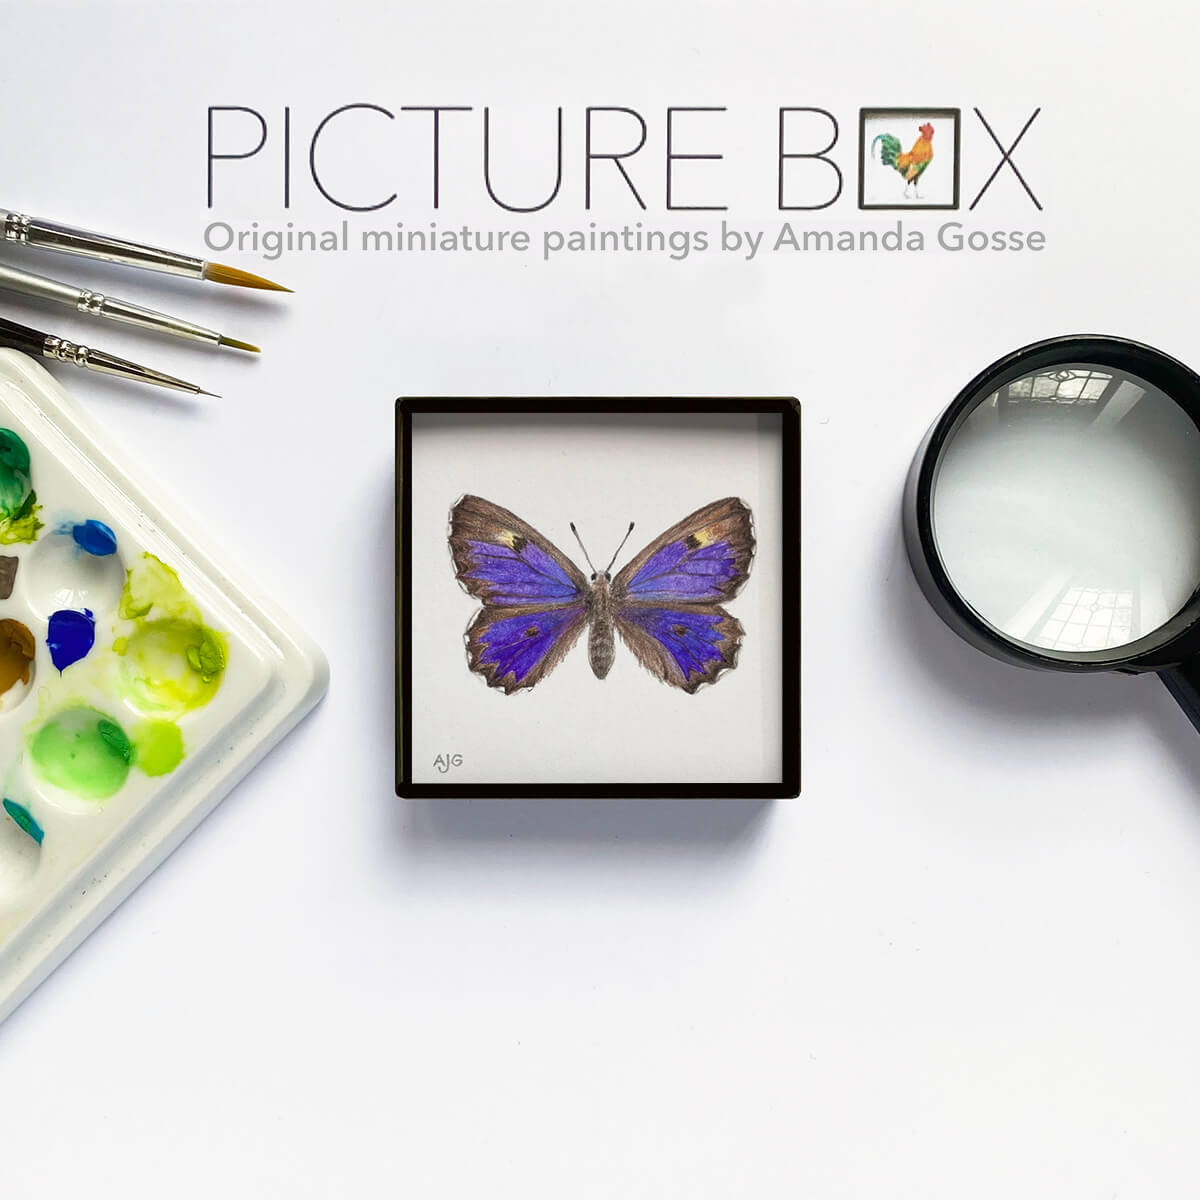 Bronze Azure Butterfly Painting Picture Box miniature insect artwork by Amanda Gosse